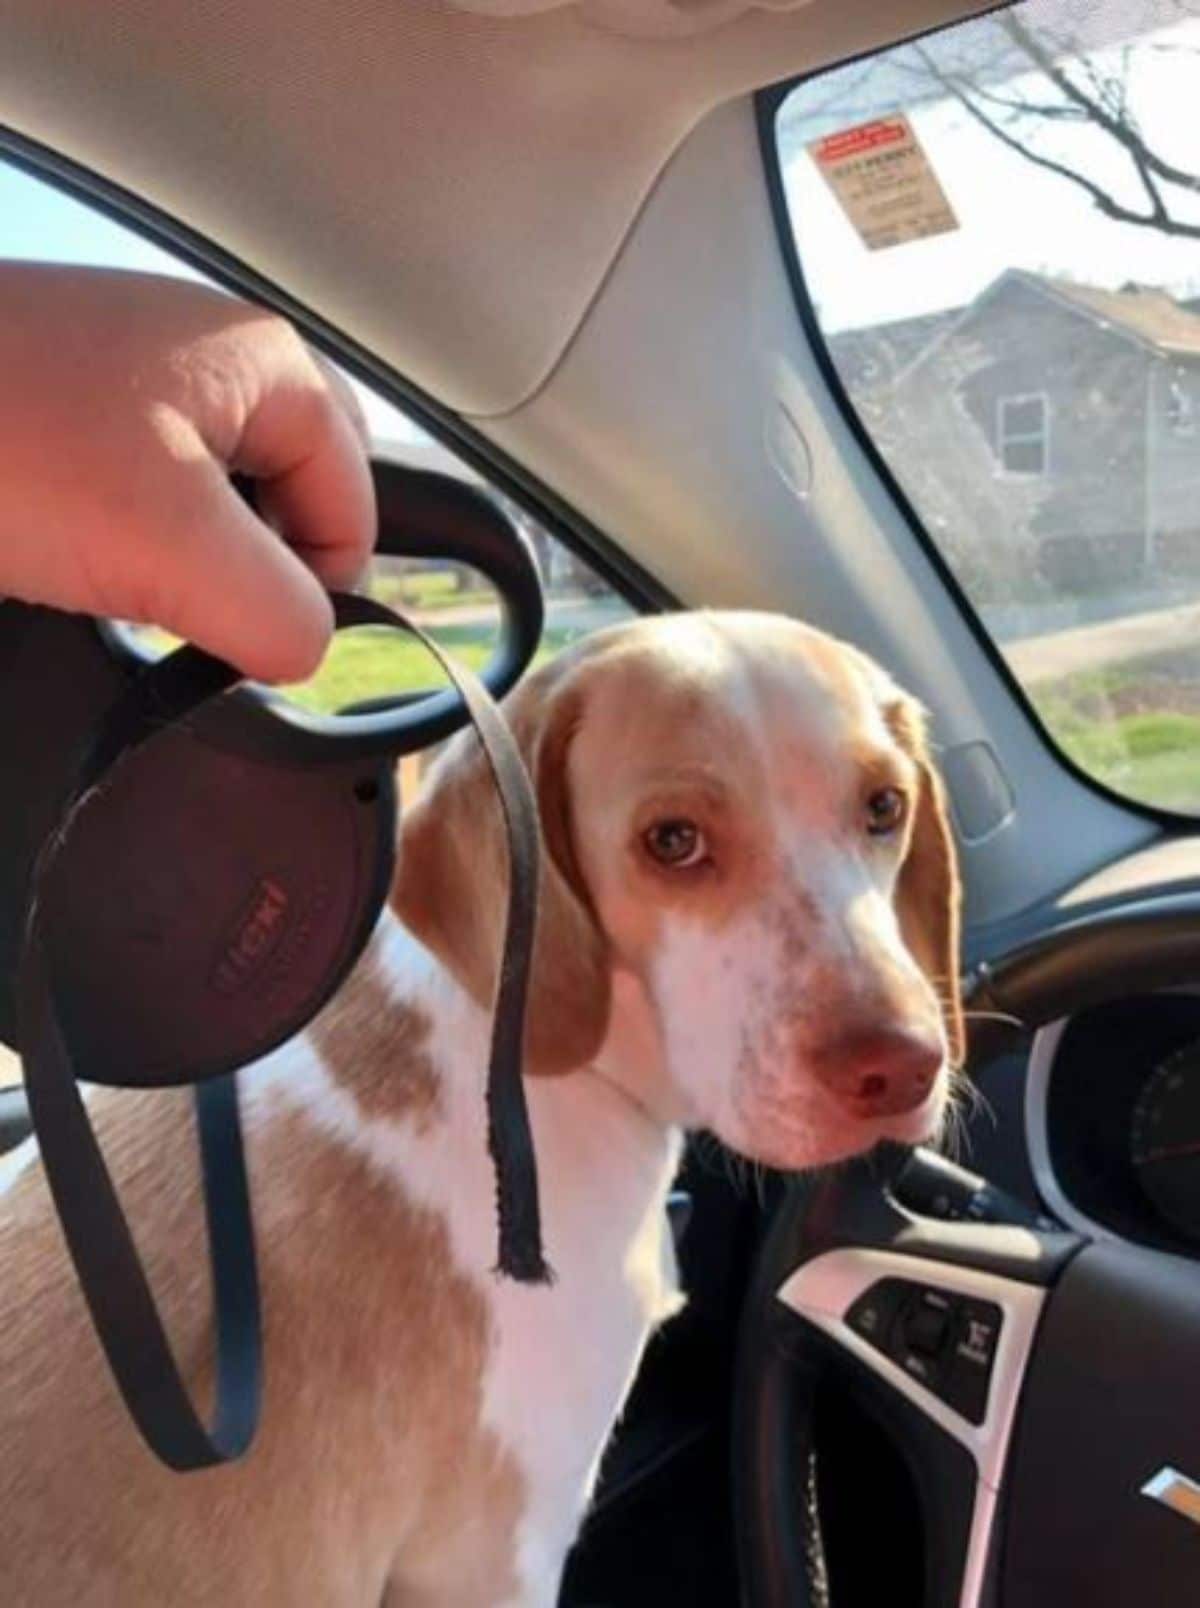 brown and white dog inside a car with someone holding up a broken set of headphones